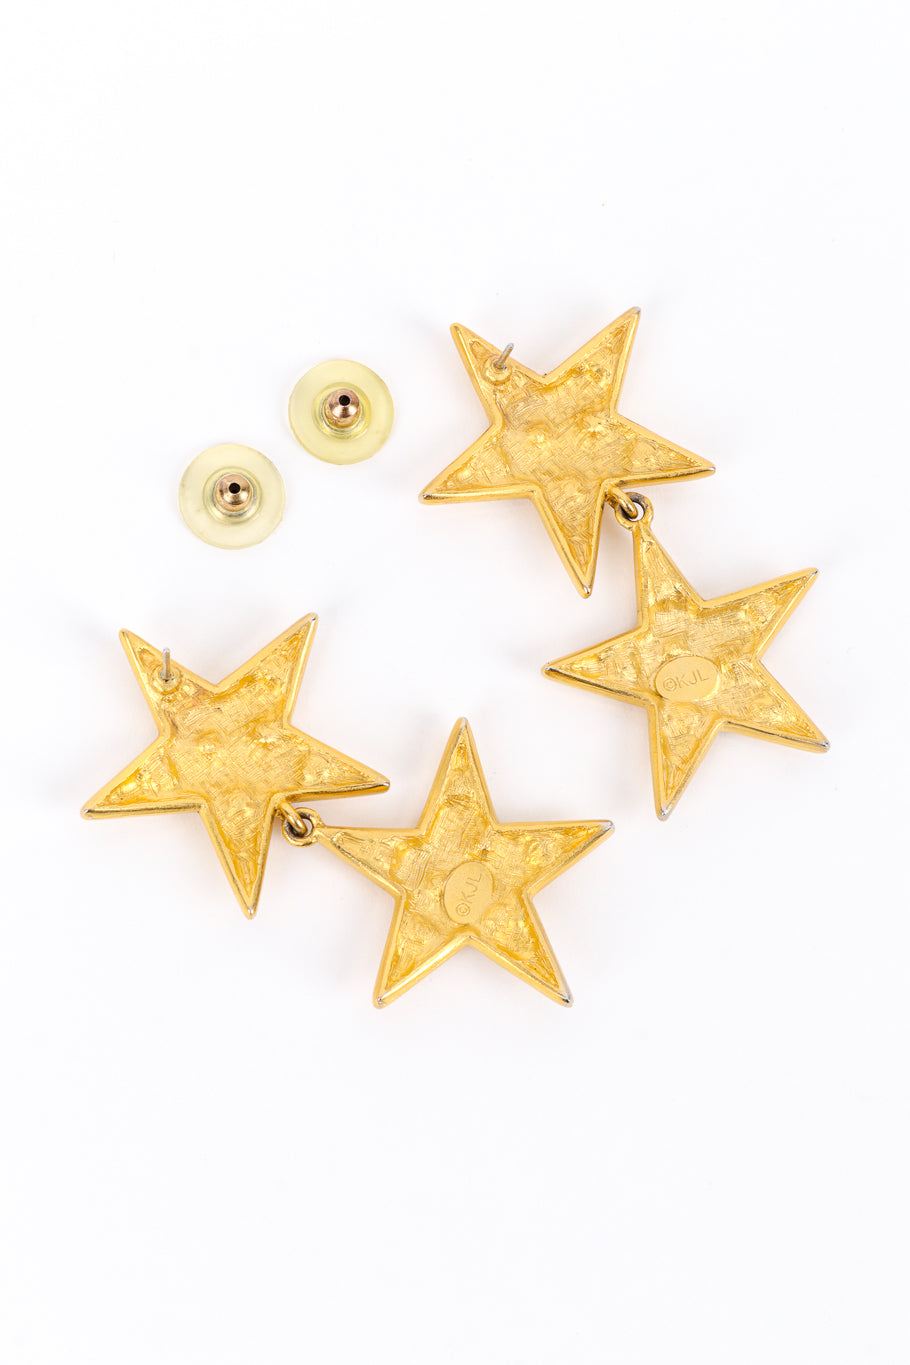 Vintage Kenneth Jay Lane Crystal Star Drop Earrings back with post backing off @recess la